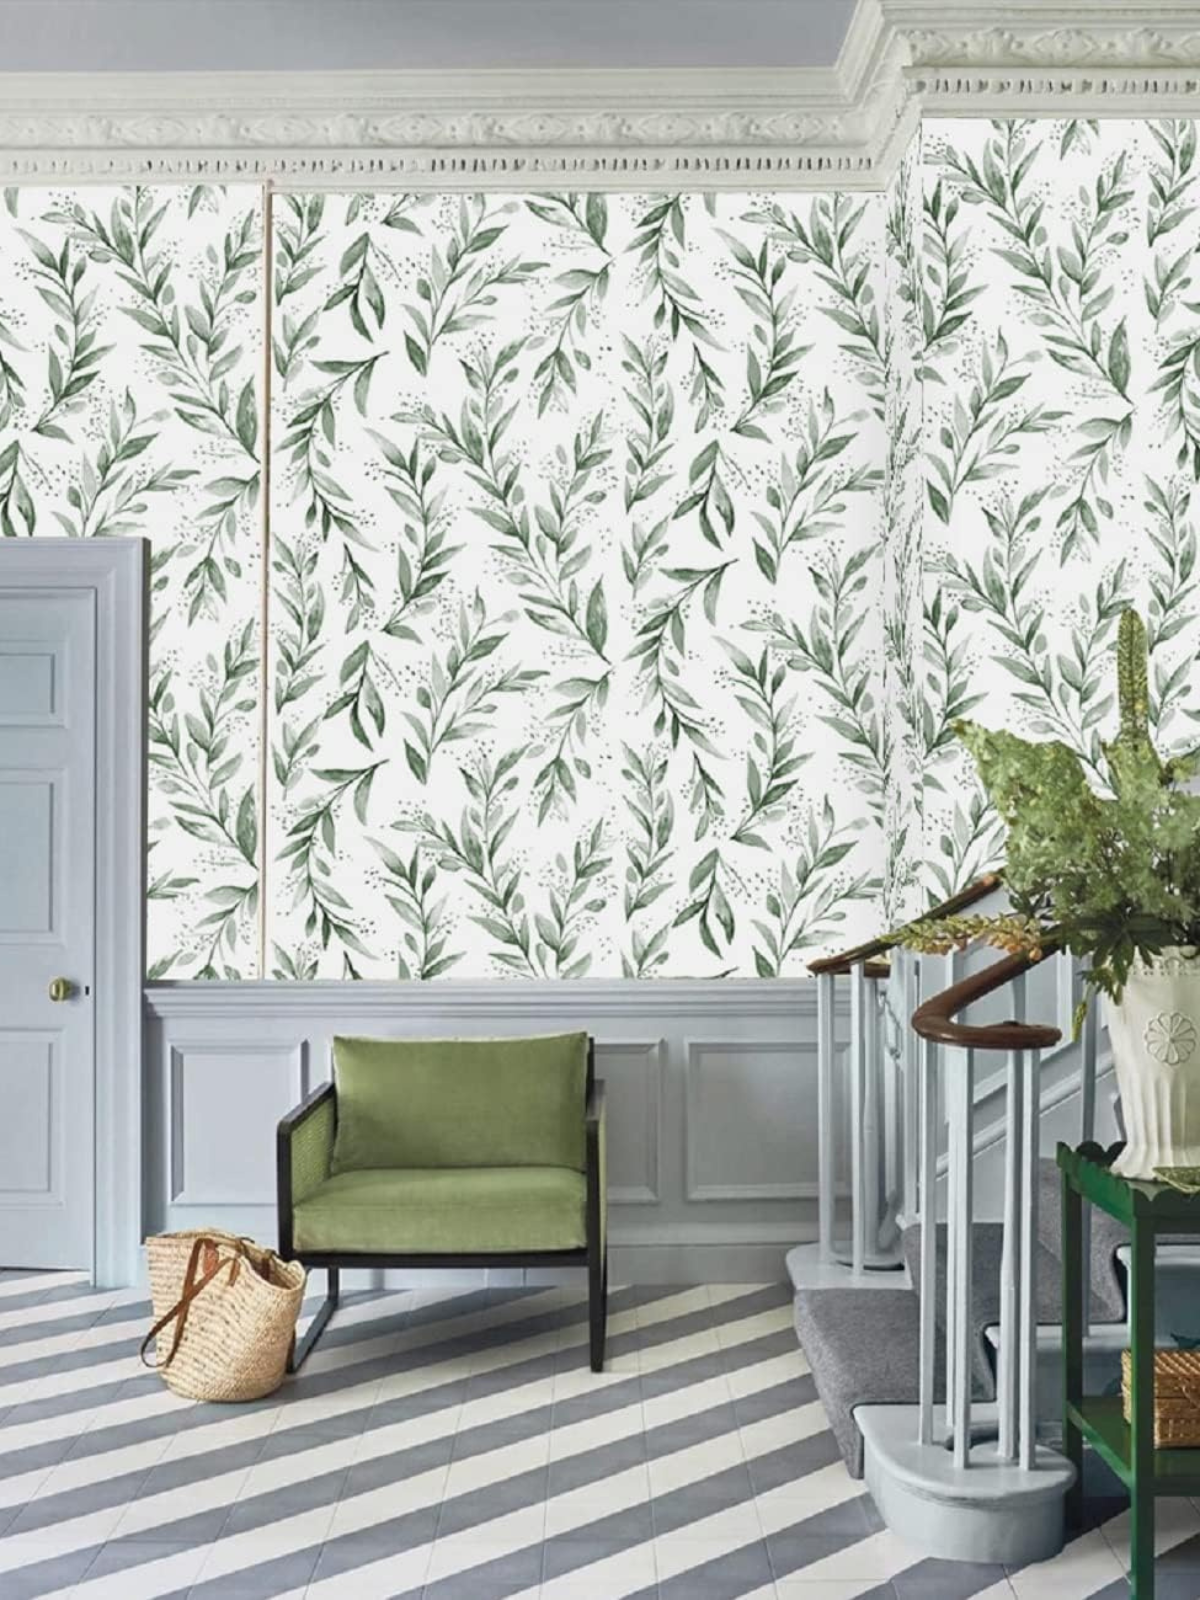 Vinyl Peel and Stick Wallpaper Olive Leaf, Green/White Removable Self Adhesive Wallpaper Watercolor Leaves Wall Paper Sticky for Bedroom Shelf Liner 17.3 inch x 196.7inch